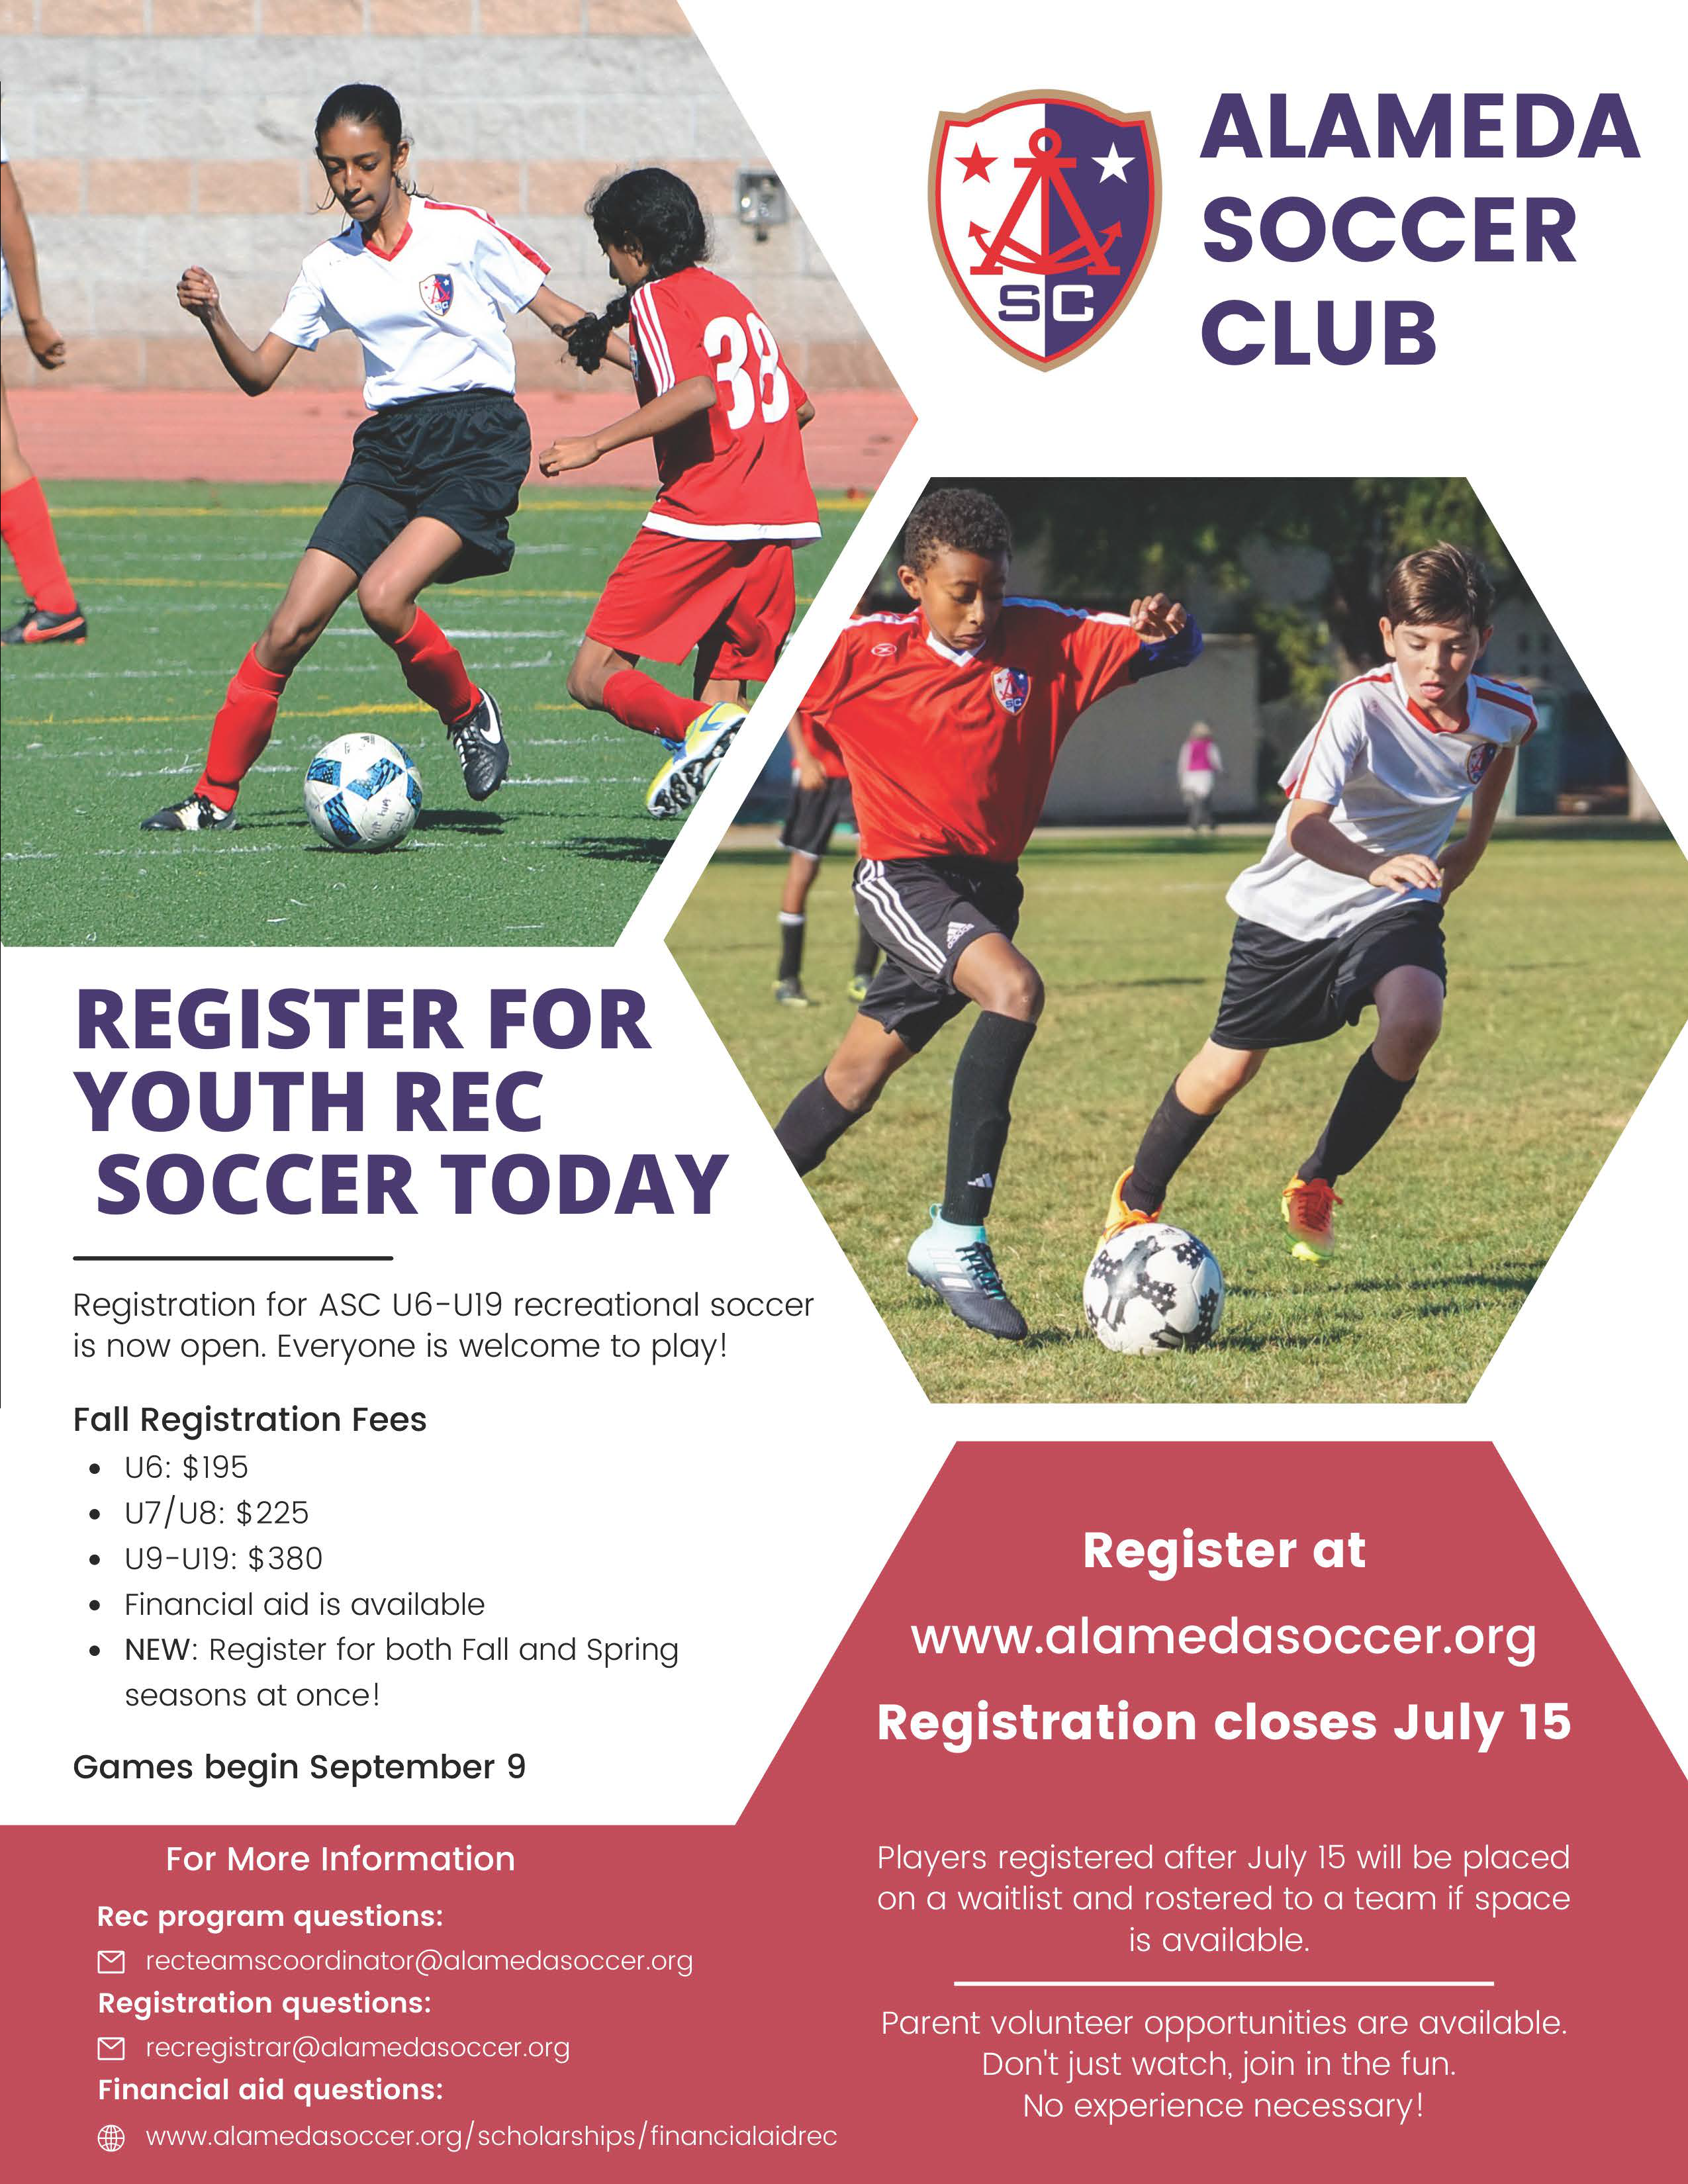 Register for Youth Rec Soccer Today